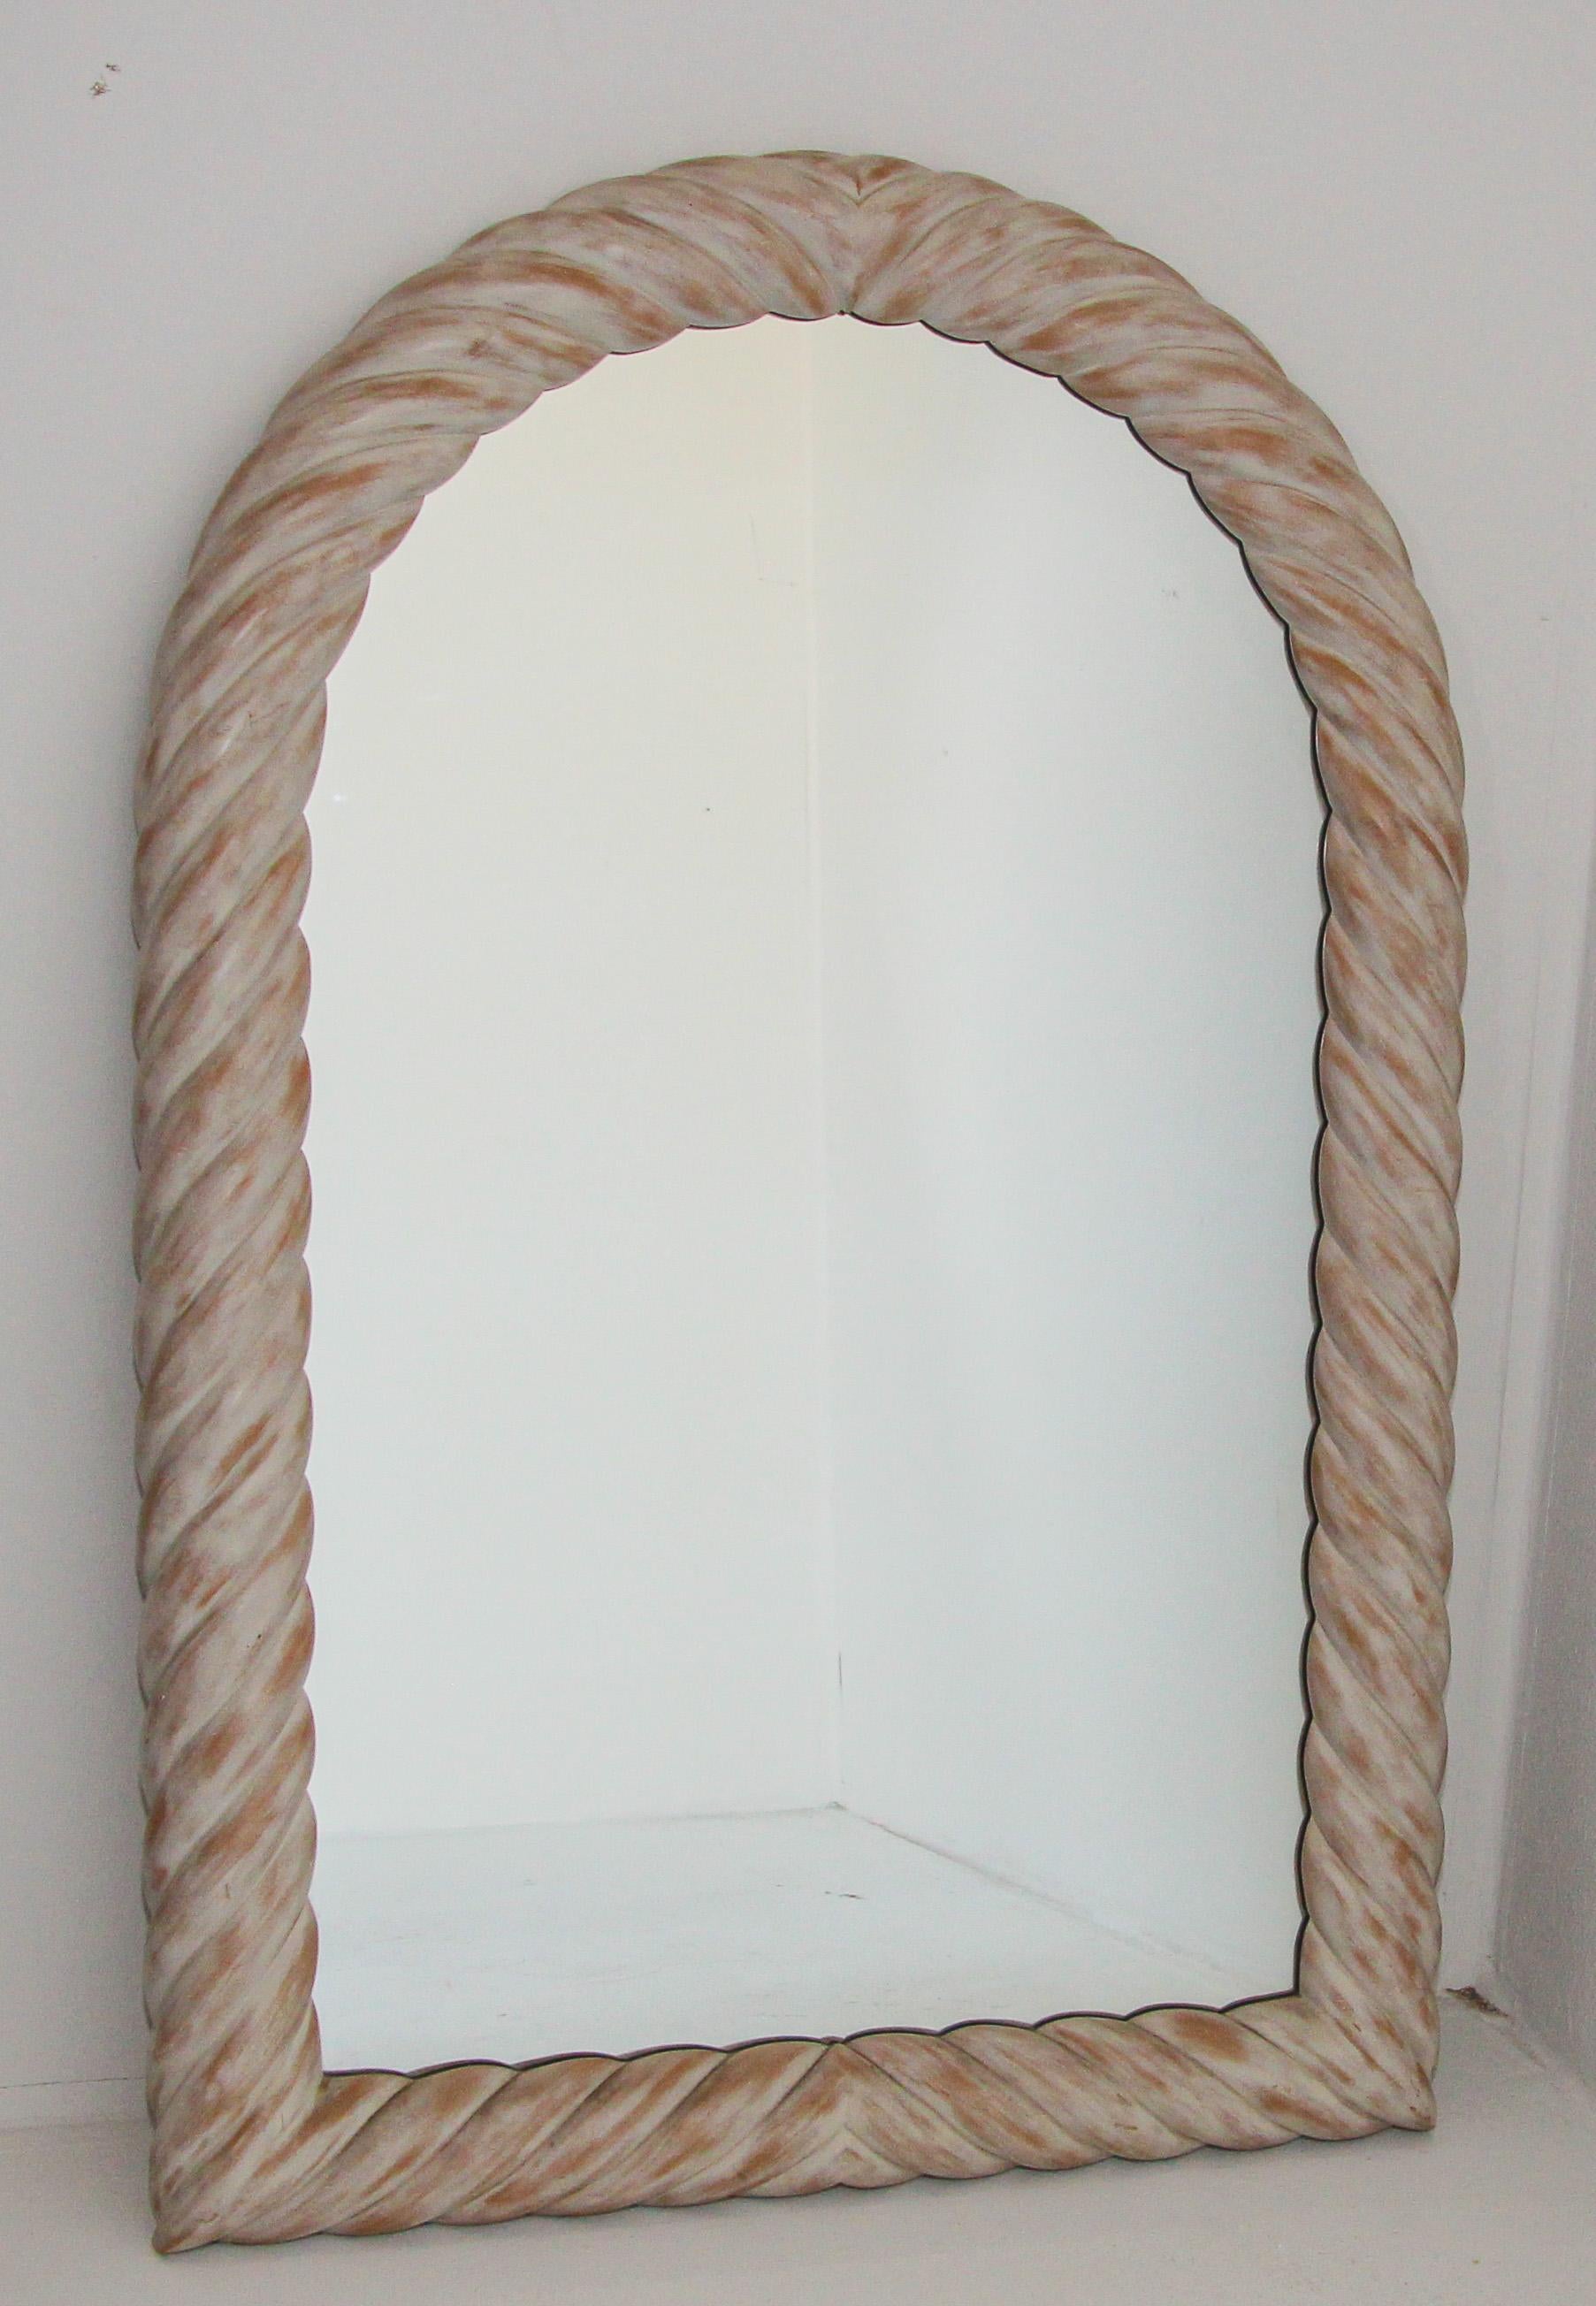 White bleached wood arched wall mirror.
Post Modern vintage French arched topped wall mirror.
This washed out twisted wood mirror offers an optimal focal point for any room. 
The creamy white washed textured wood is sure to go with just about any